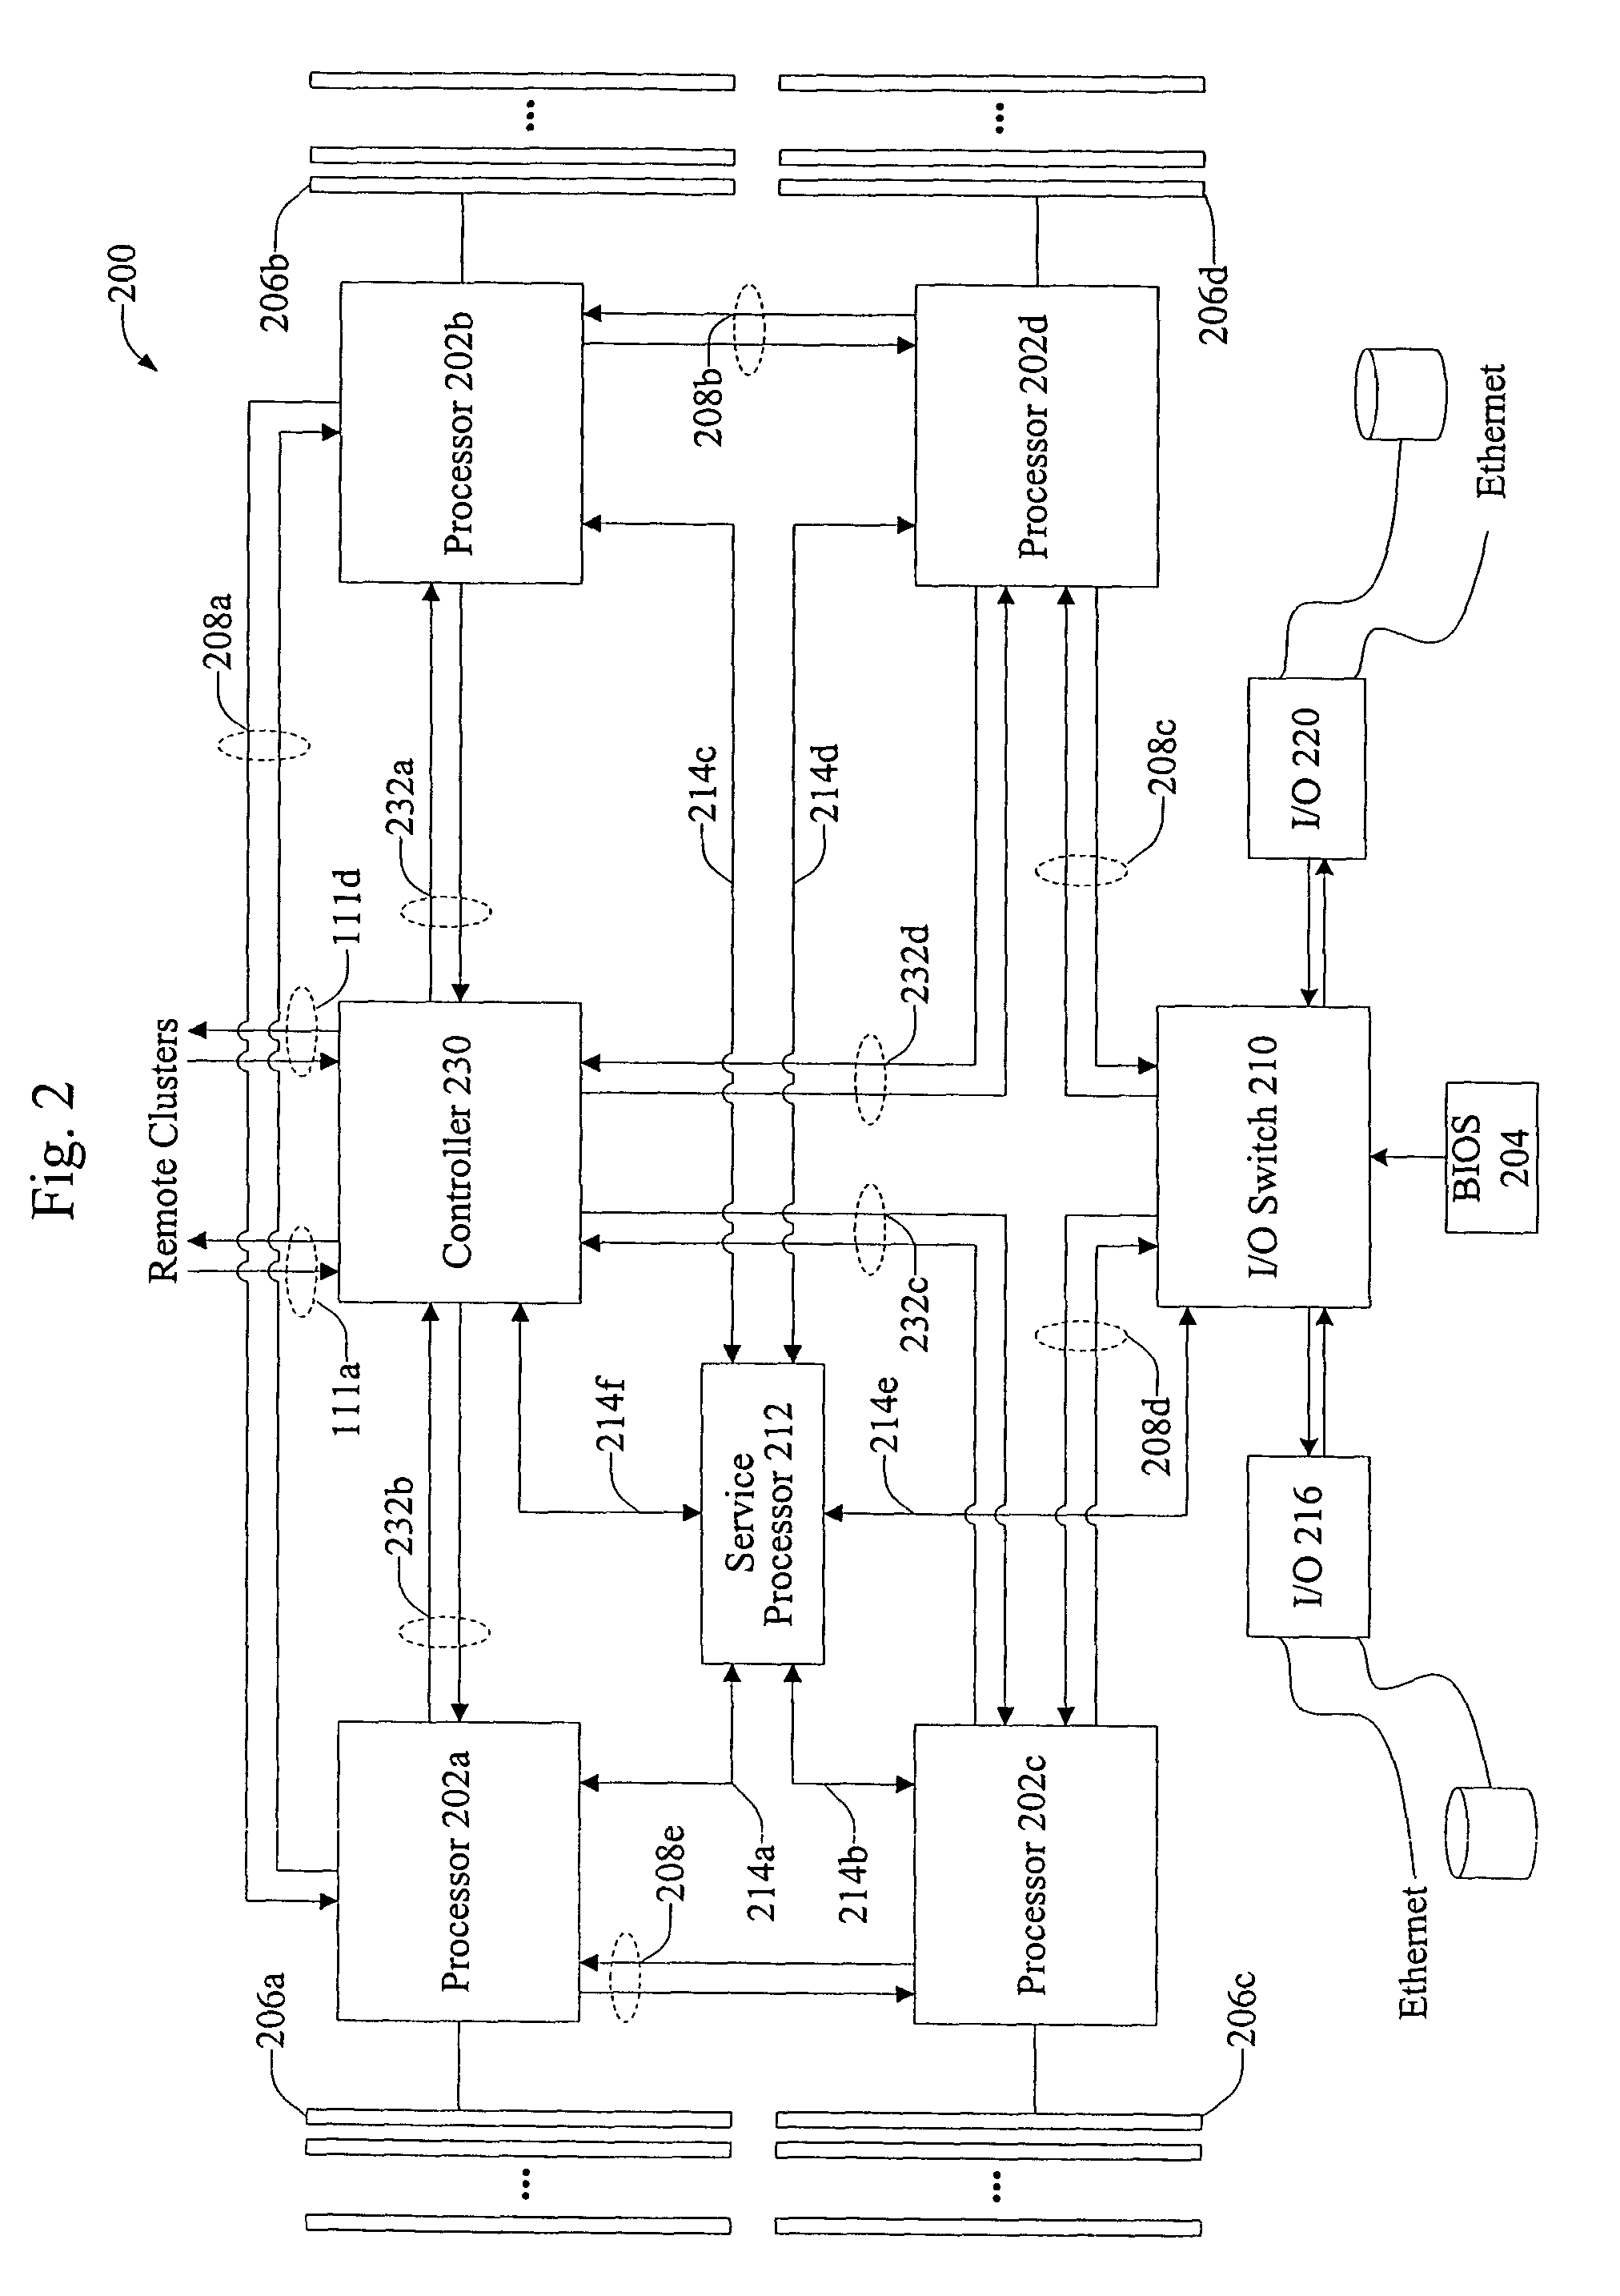 Synchronized communication between multi-processor clusters of multi-cluster computer systems